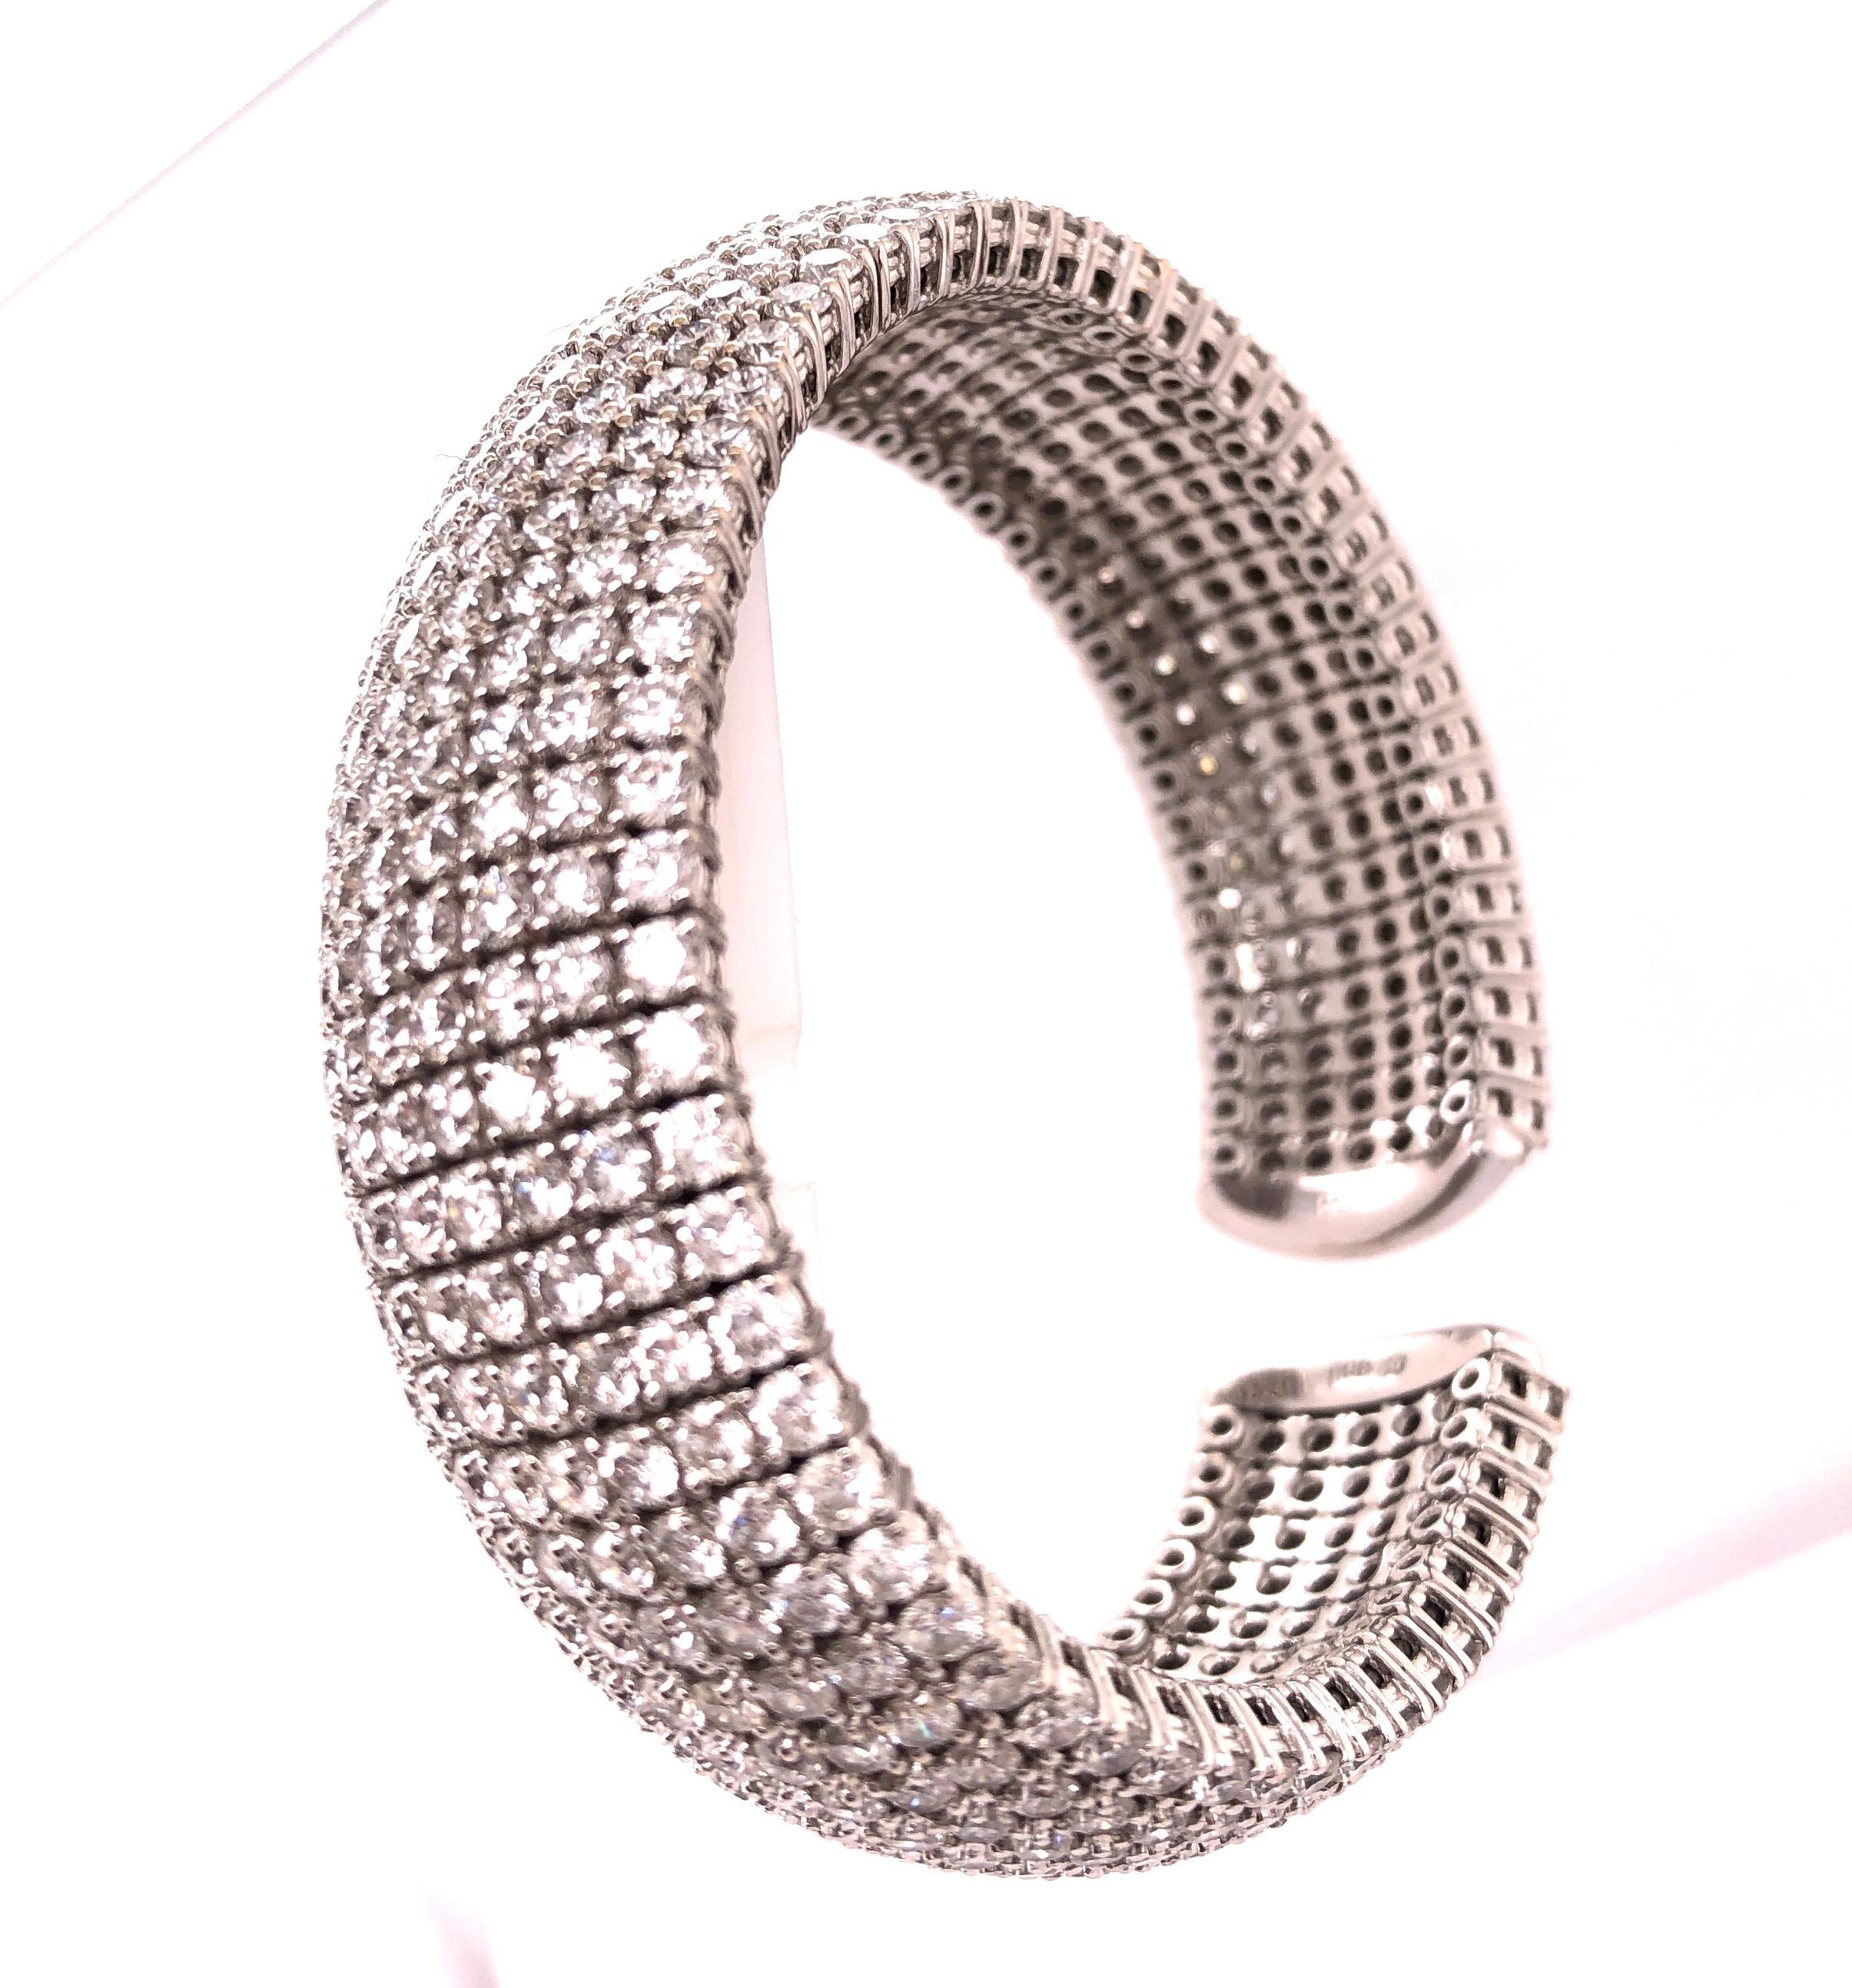 18 Karat White Gold and Diamond Cuff Bracelet Weighing Approx 32.89 Carat For Sale 2